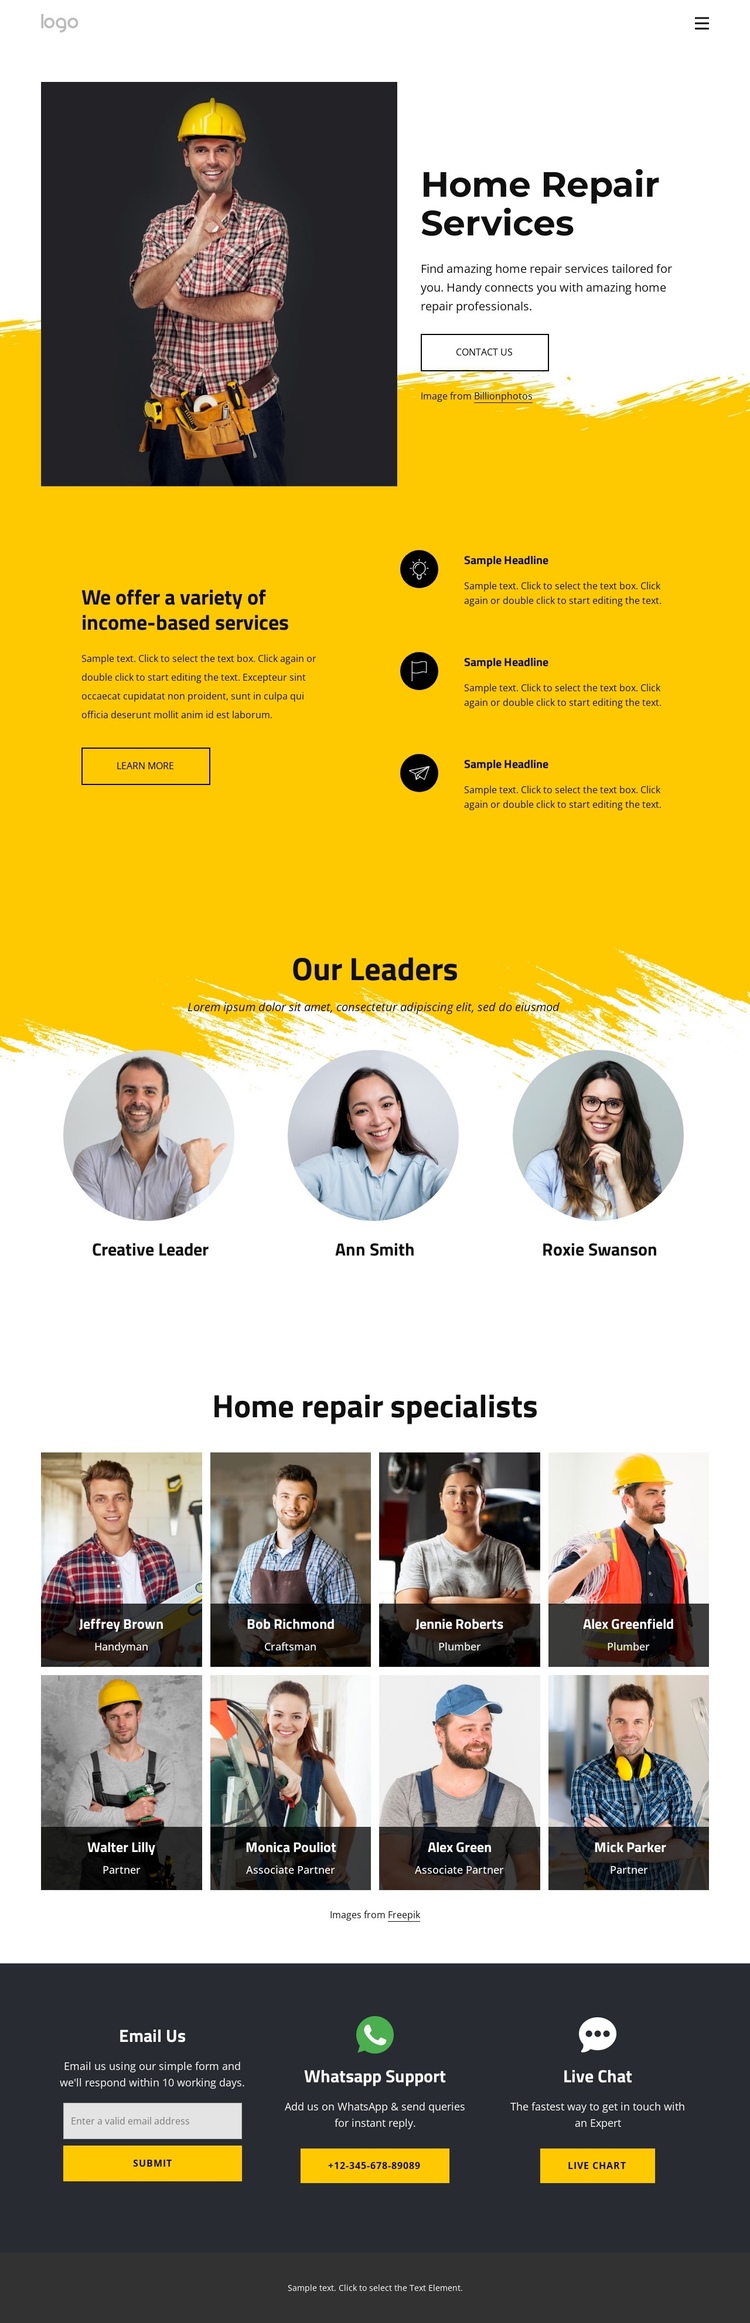 Find home repair services today Website Builder Software